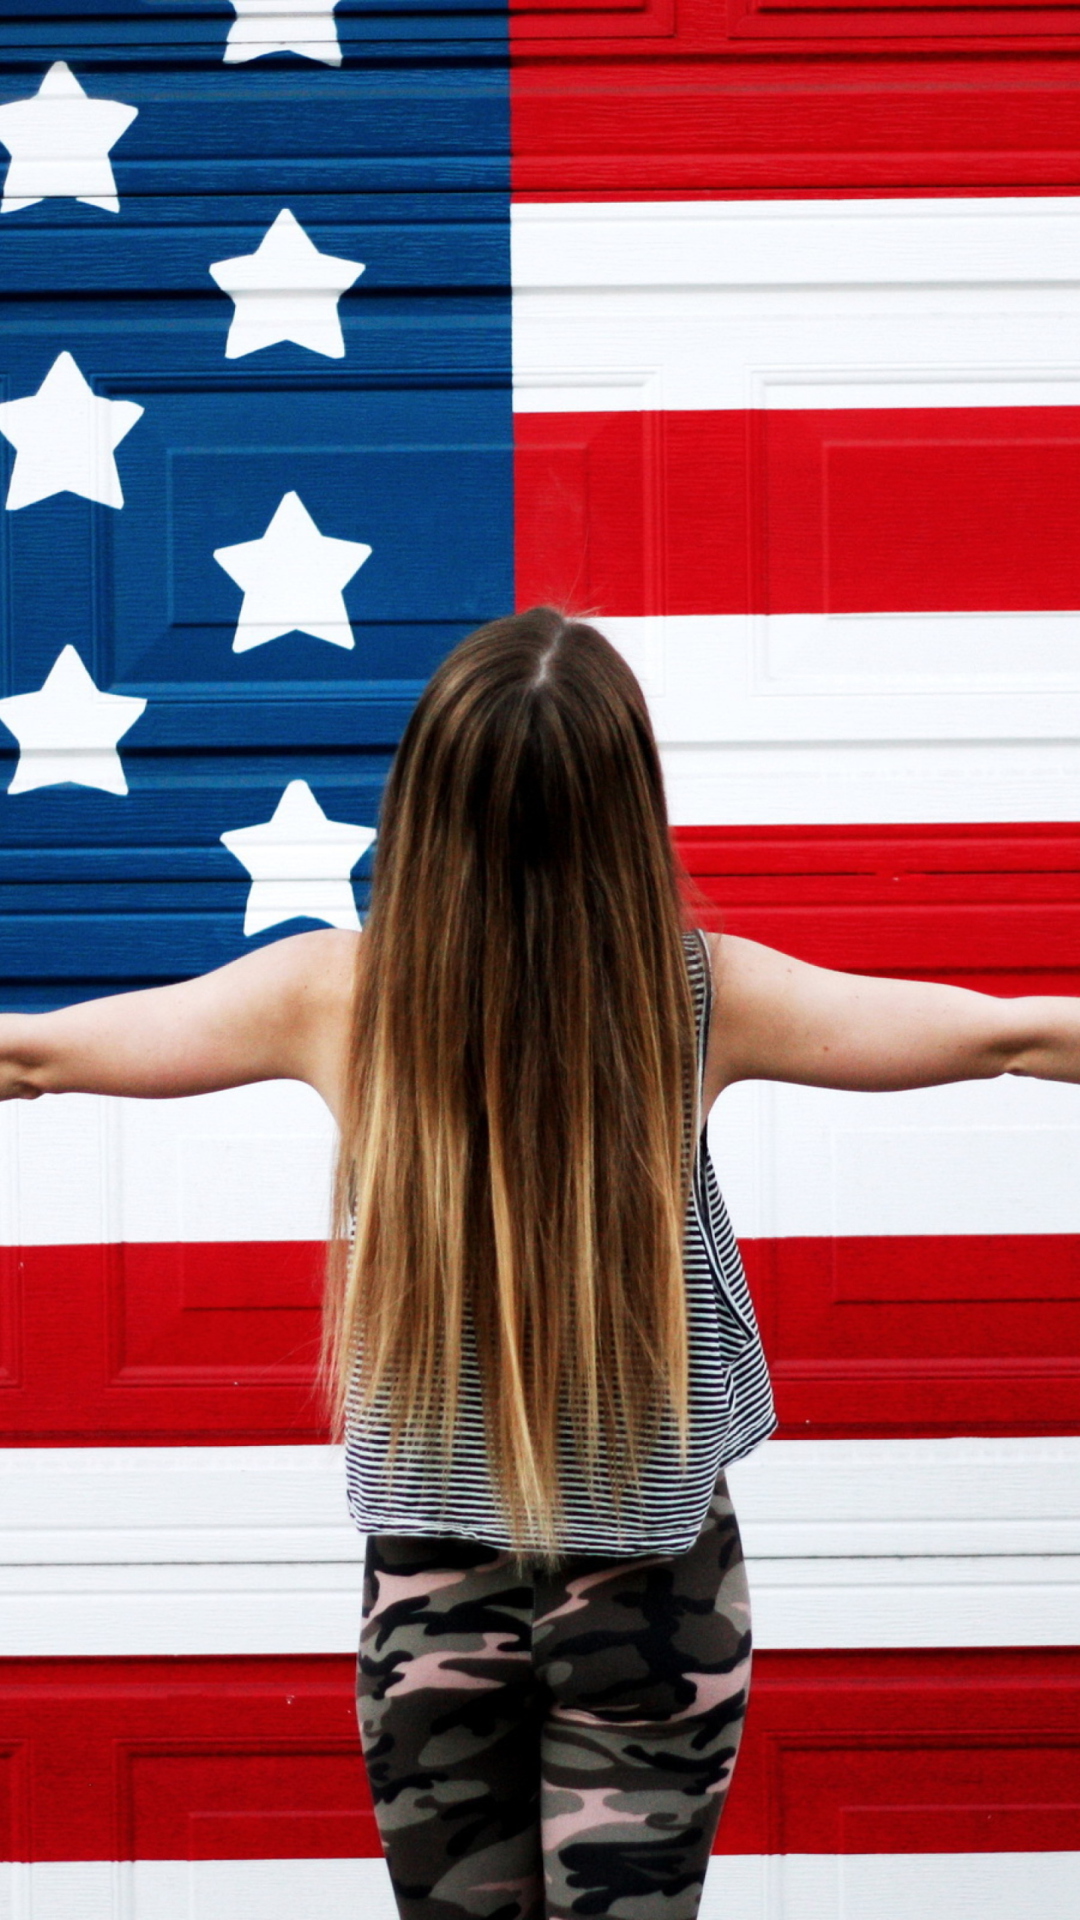 American Girl In Front Of USA Flag screenshot #1 1080x1920